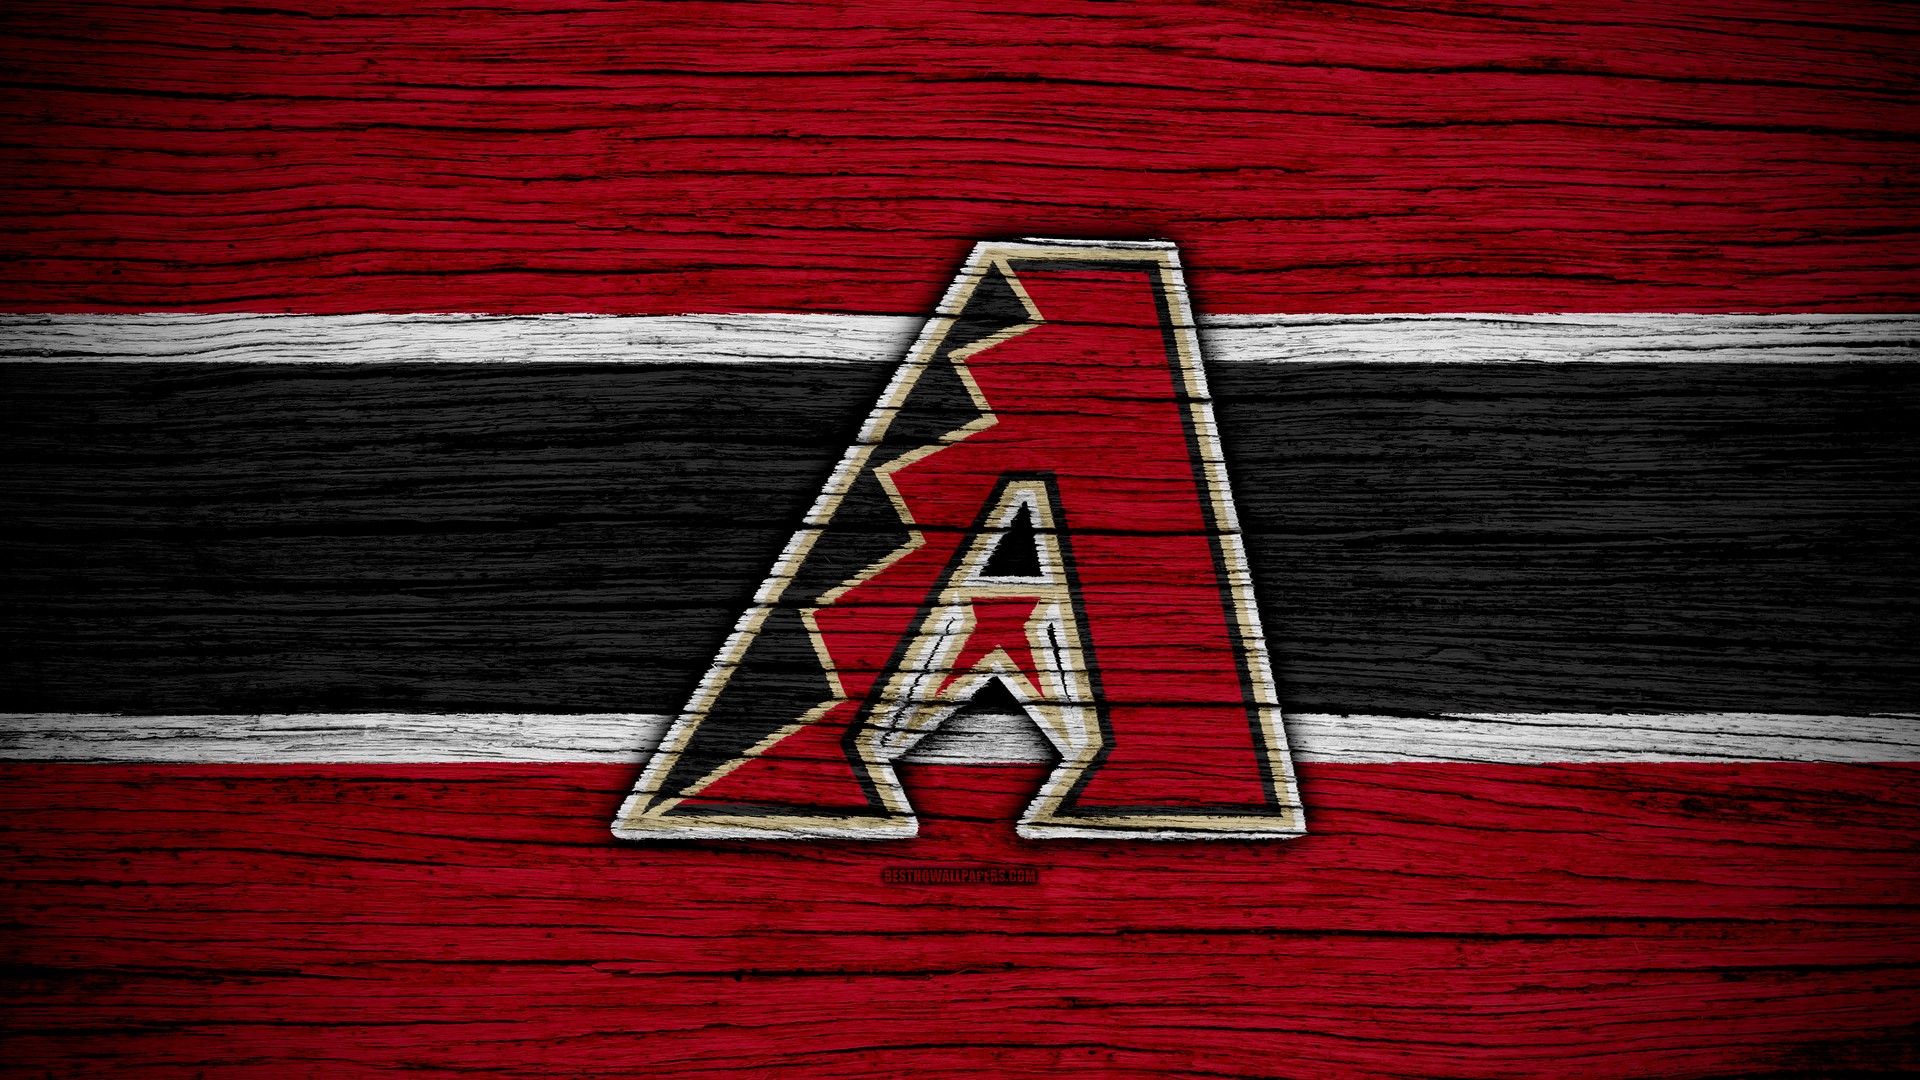 Arizona Diamondbacks Wallpaper With high-resolution 1920X1080 pixel. You can use this wallpaper for Mac Desktop Wallpaper, Laptop Screensavers, Android Wallpapers, Tablet or iPhone Home Screen and another mobile phone device